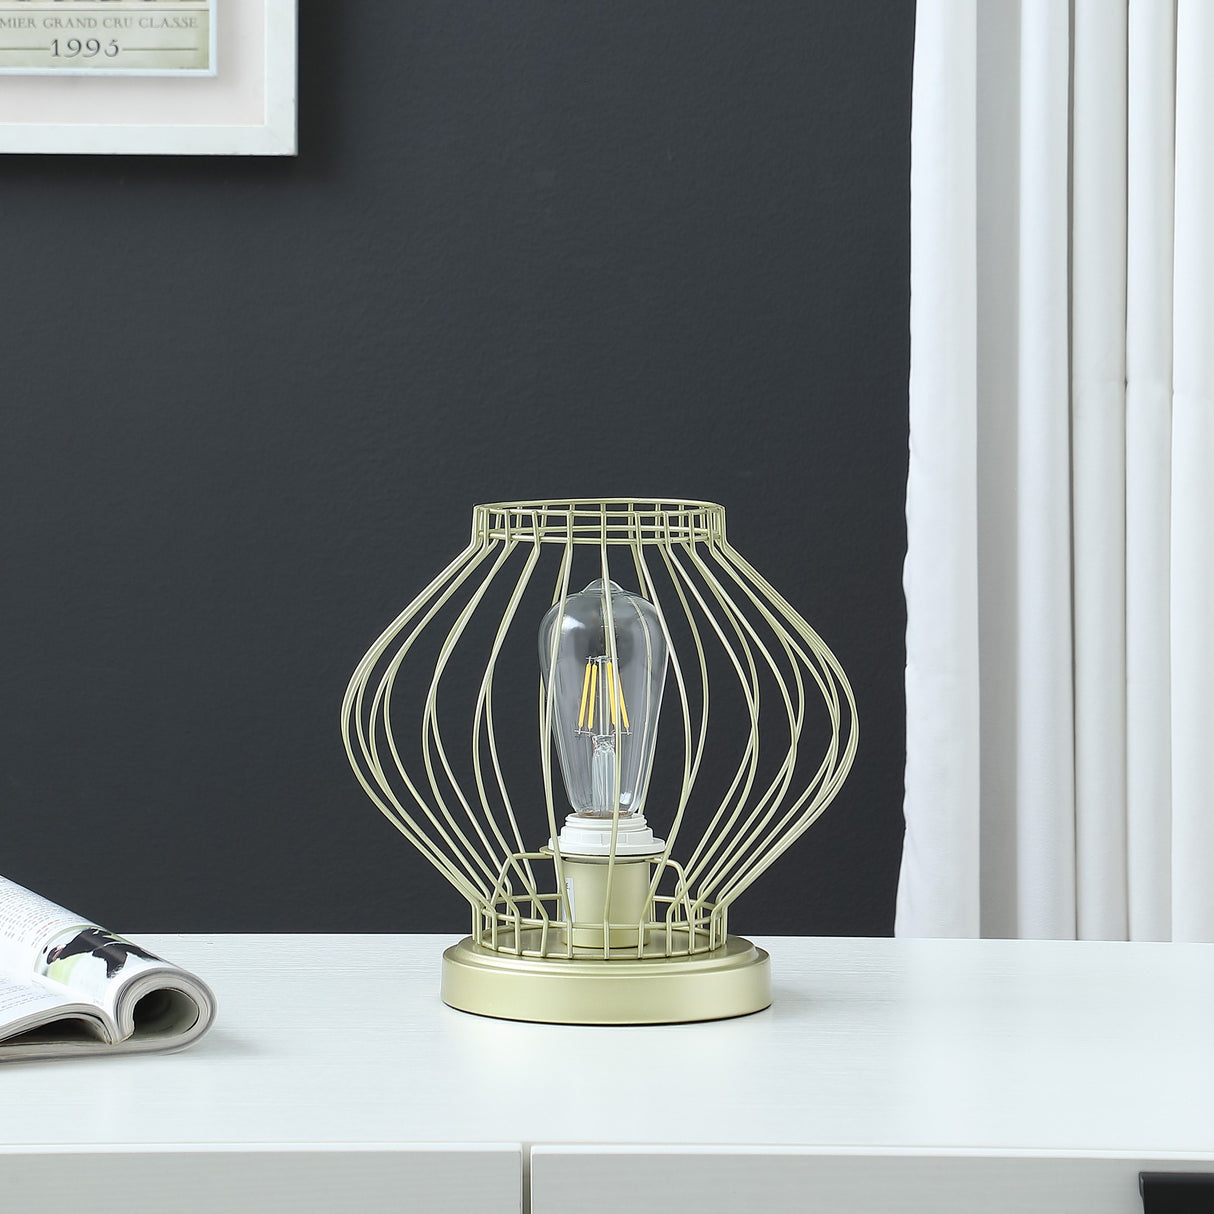 10" Gold Bedside Table Lamp With Gold Cage Shade